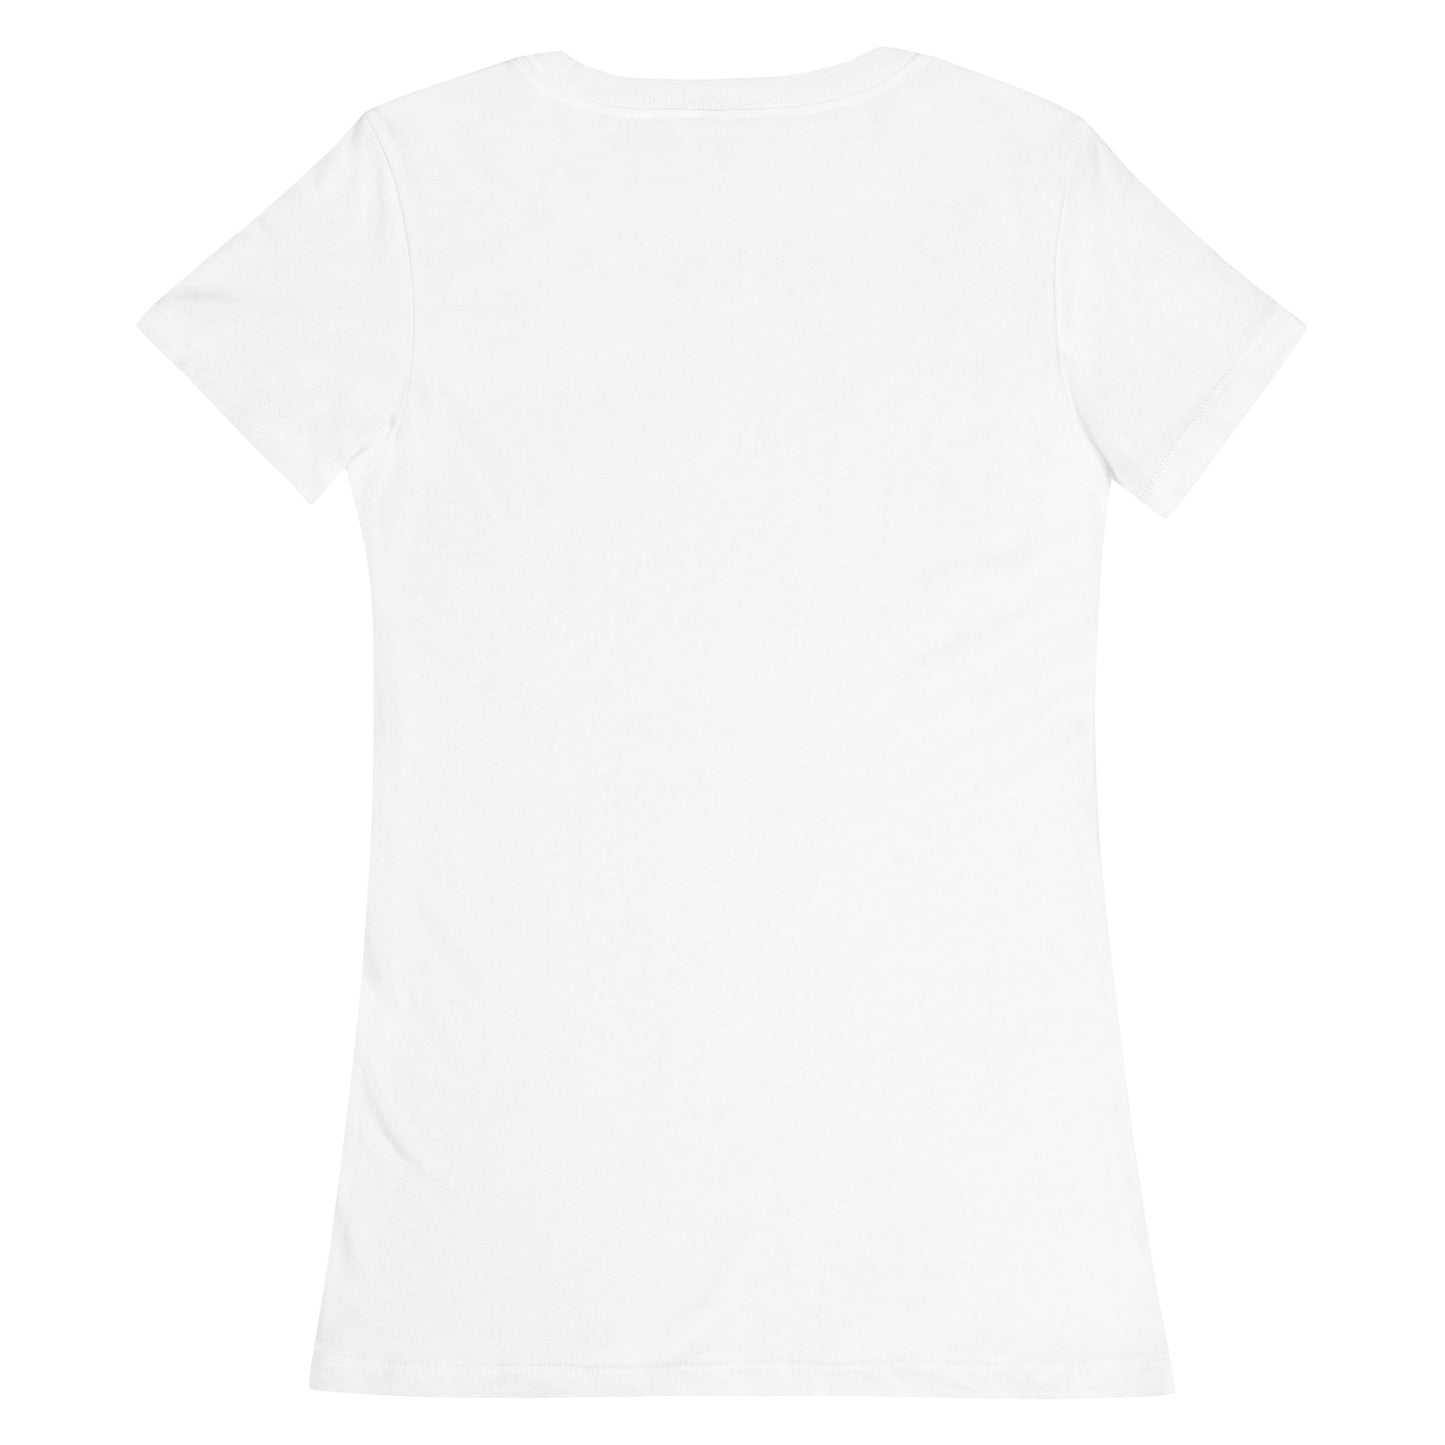 Wild Bloom Women’s Fitted T-Shirt